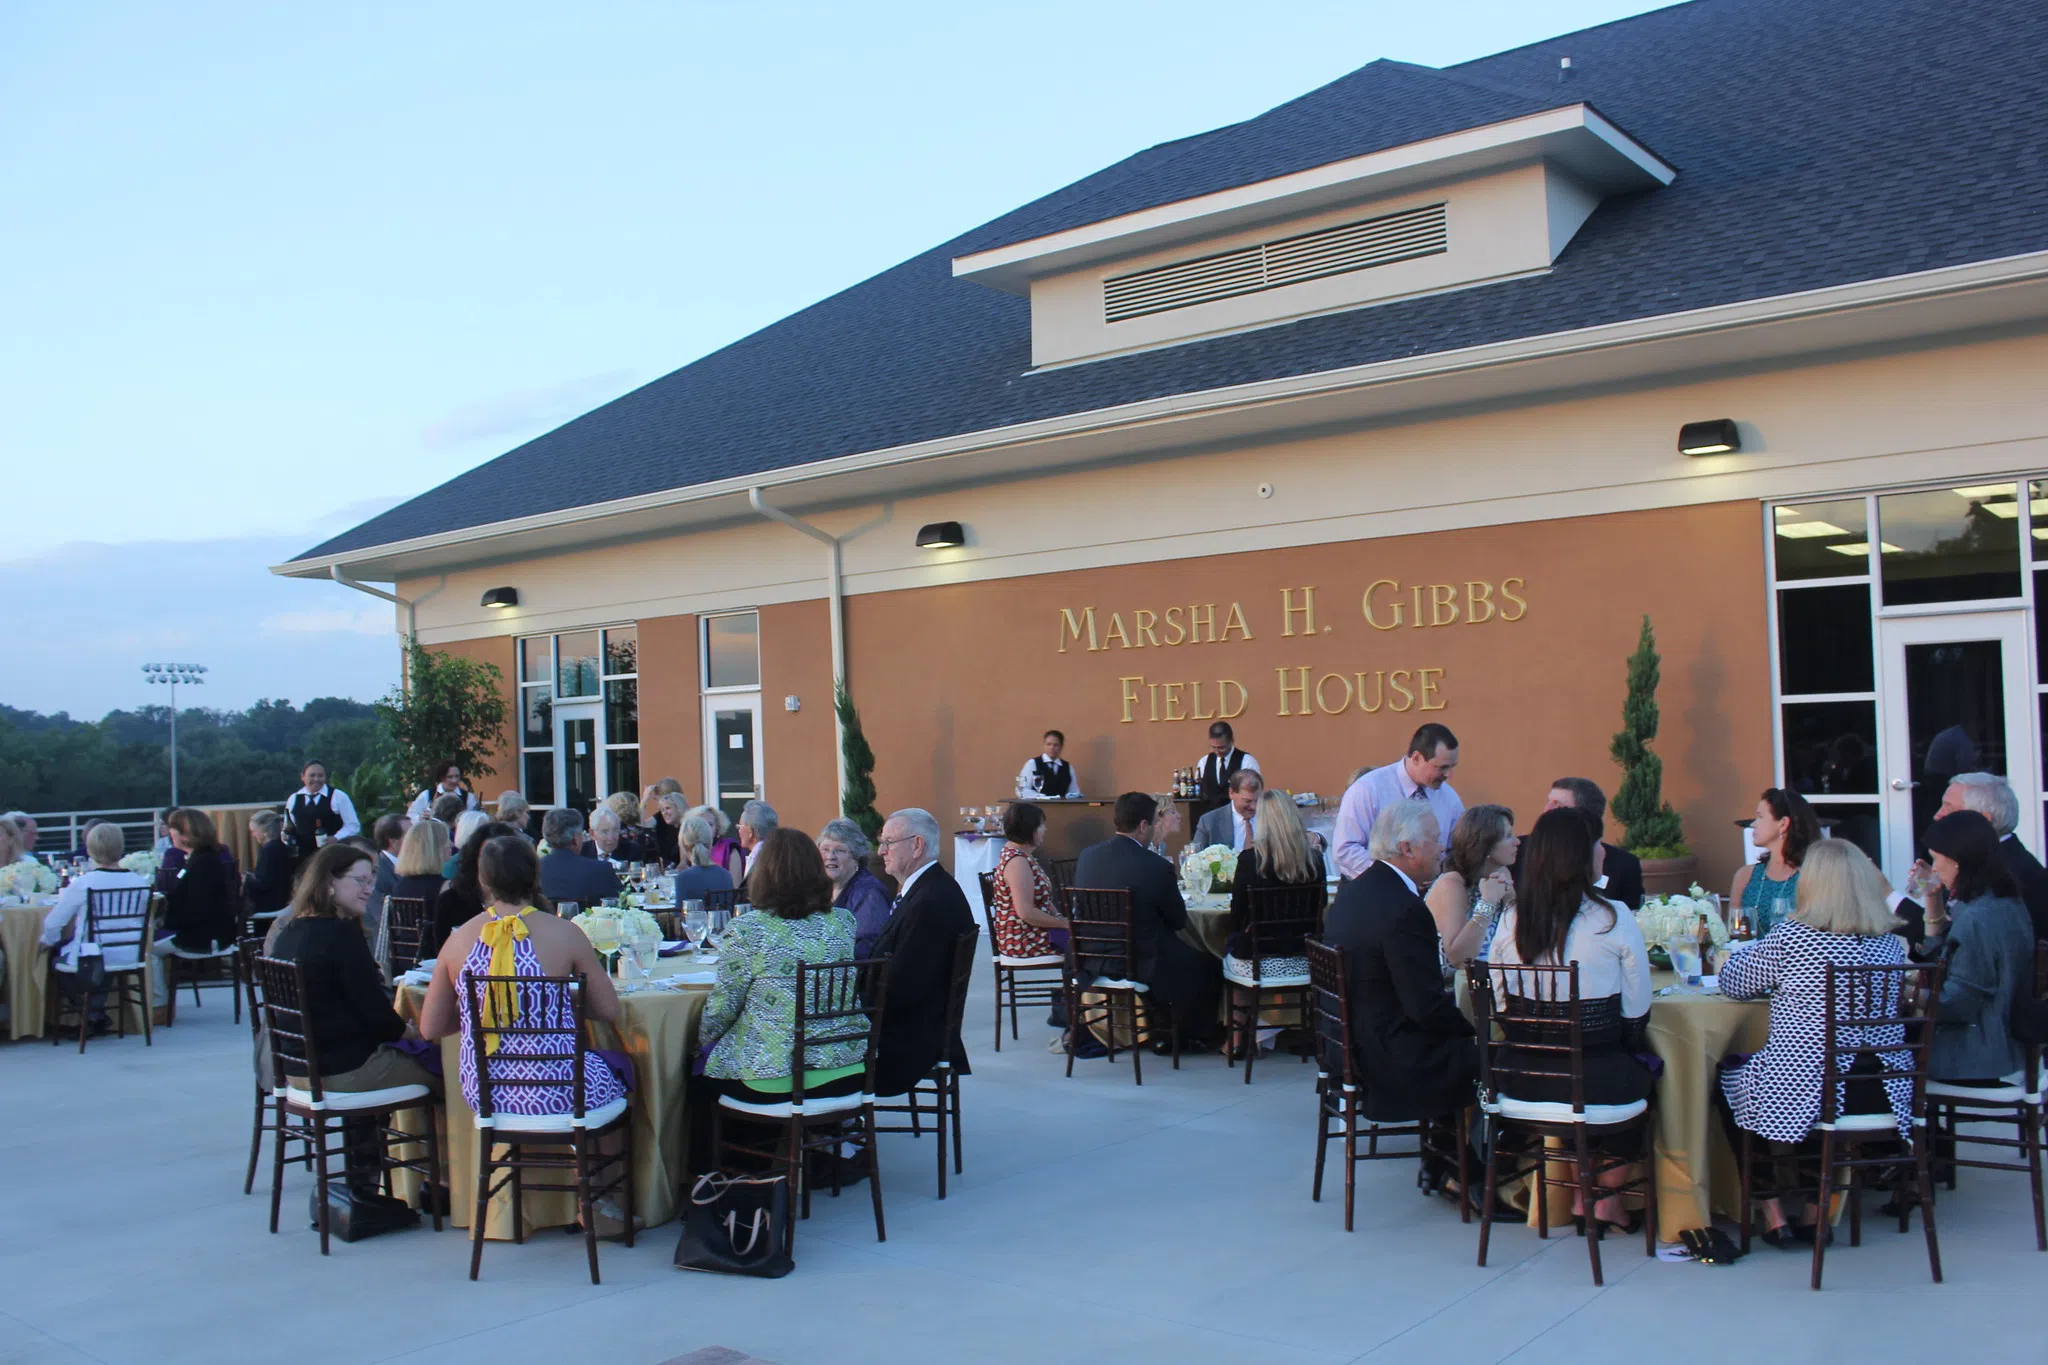 Guests dine at outdoor tables with gold chairs and cloths. A brick wall in the background reads: Marsha H. Gibbs Field House.